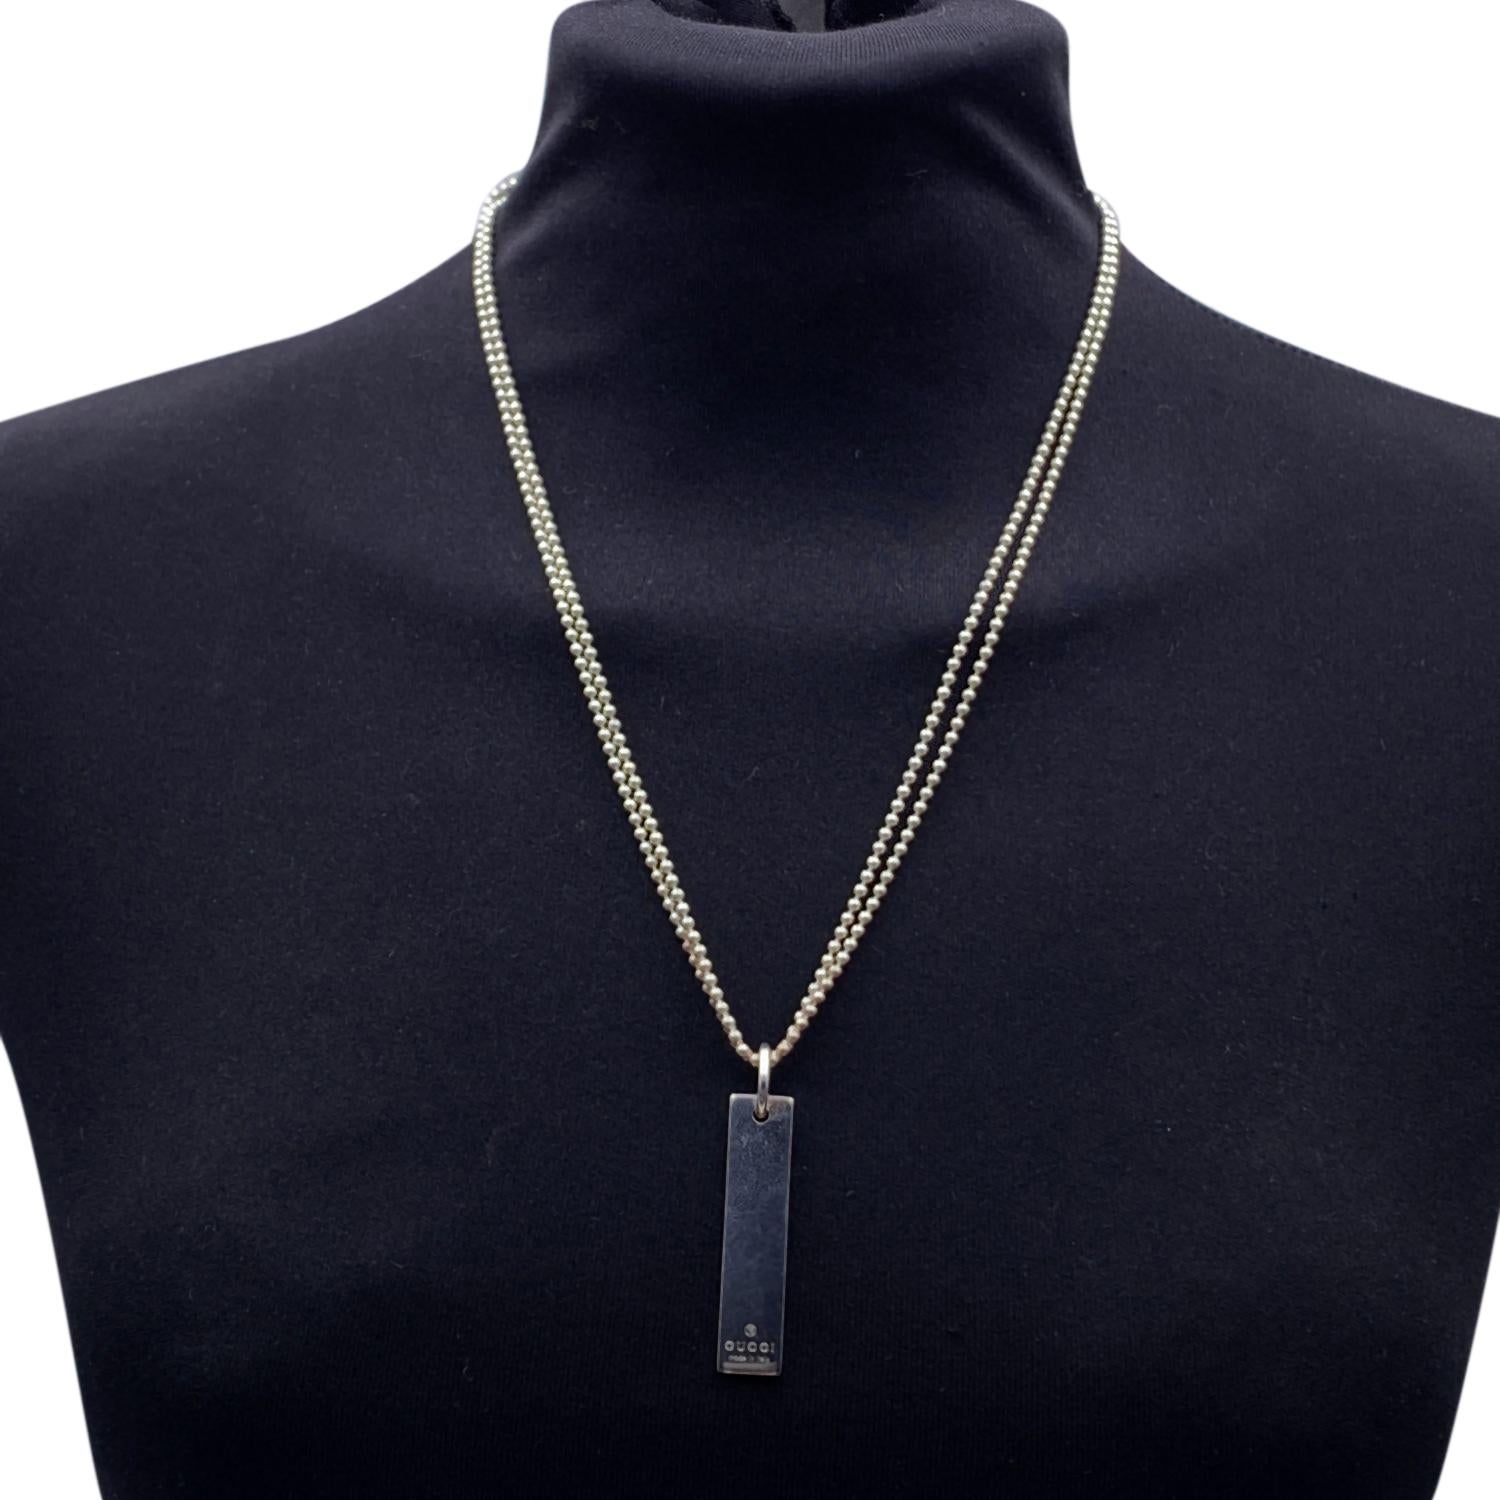 Classic unisex double ball chain necklace by Gucci. Made in sterling silver. Rectangular bar logo tag pendant. Lobster closure. Total length of the chain: 20 inches - 50.8 cm . Pendant height: 1.75 inches - 4.5 cm. 'Gucci - made in Italy' engraved